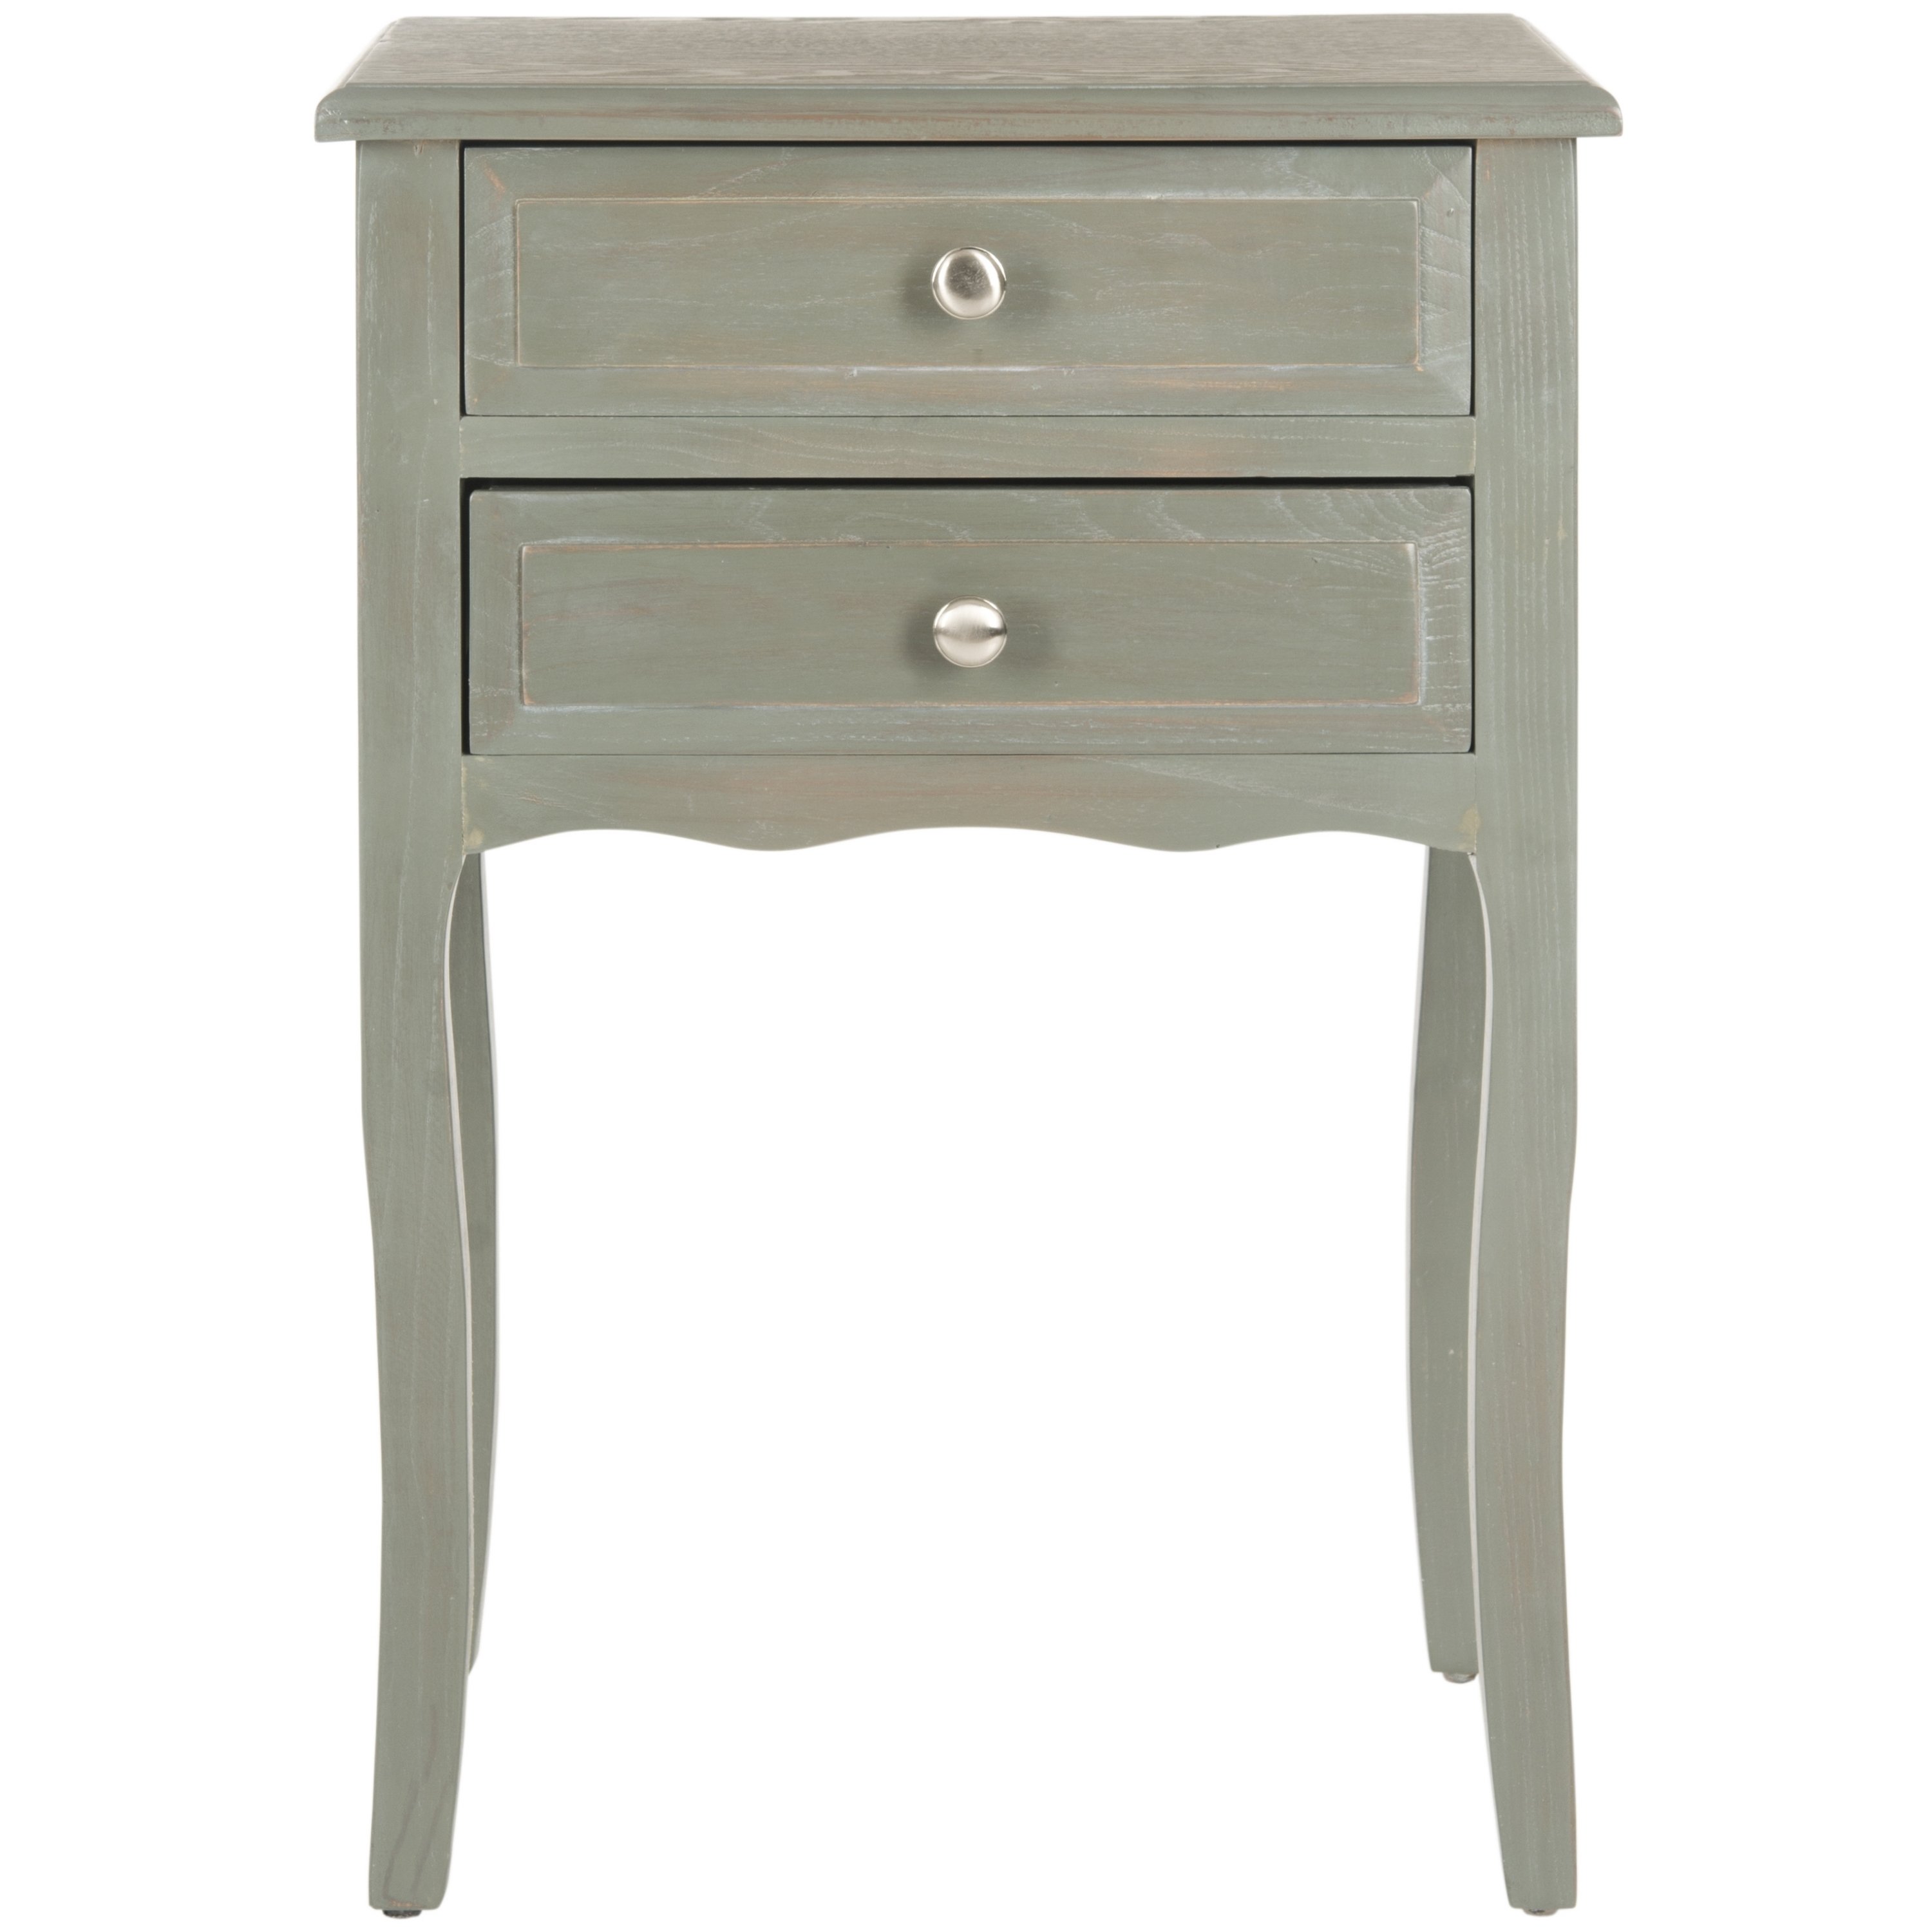 safavieh lori blue grey accent table free shipping janika today pedestal coffee with storage baskets target corner pier one dining bench lime green modern marble top contemporary